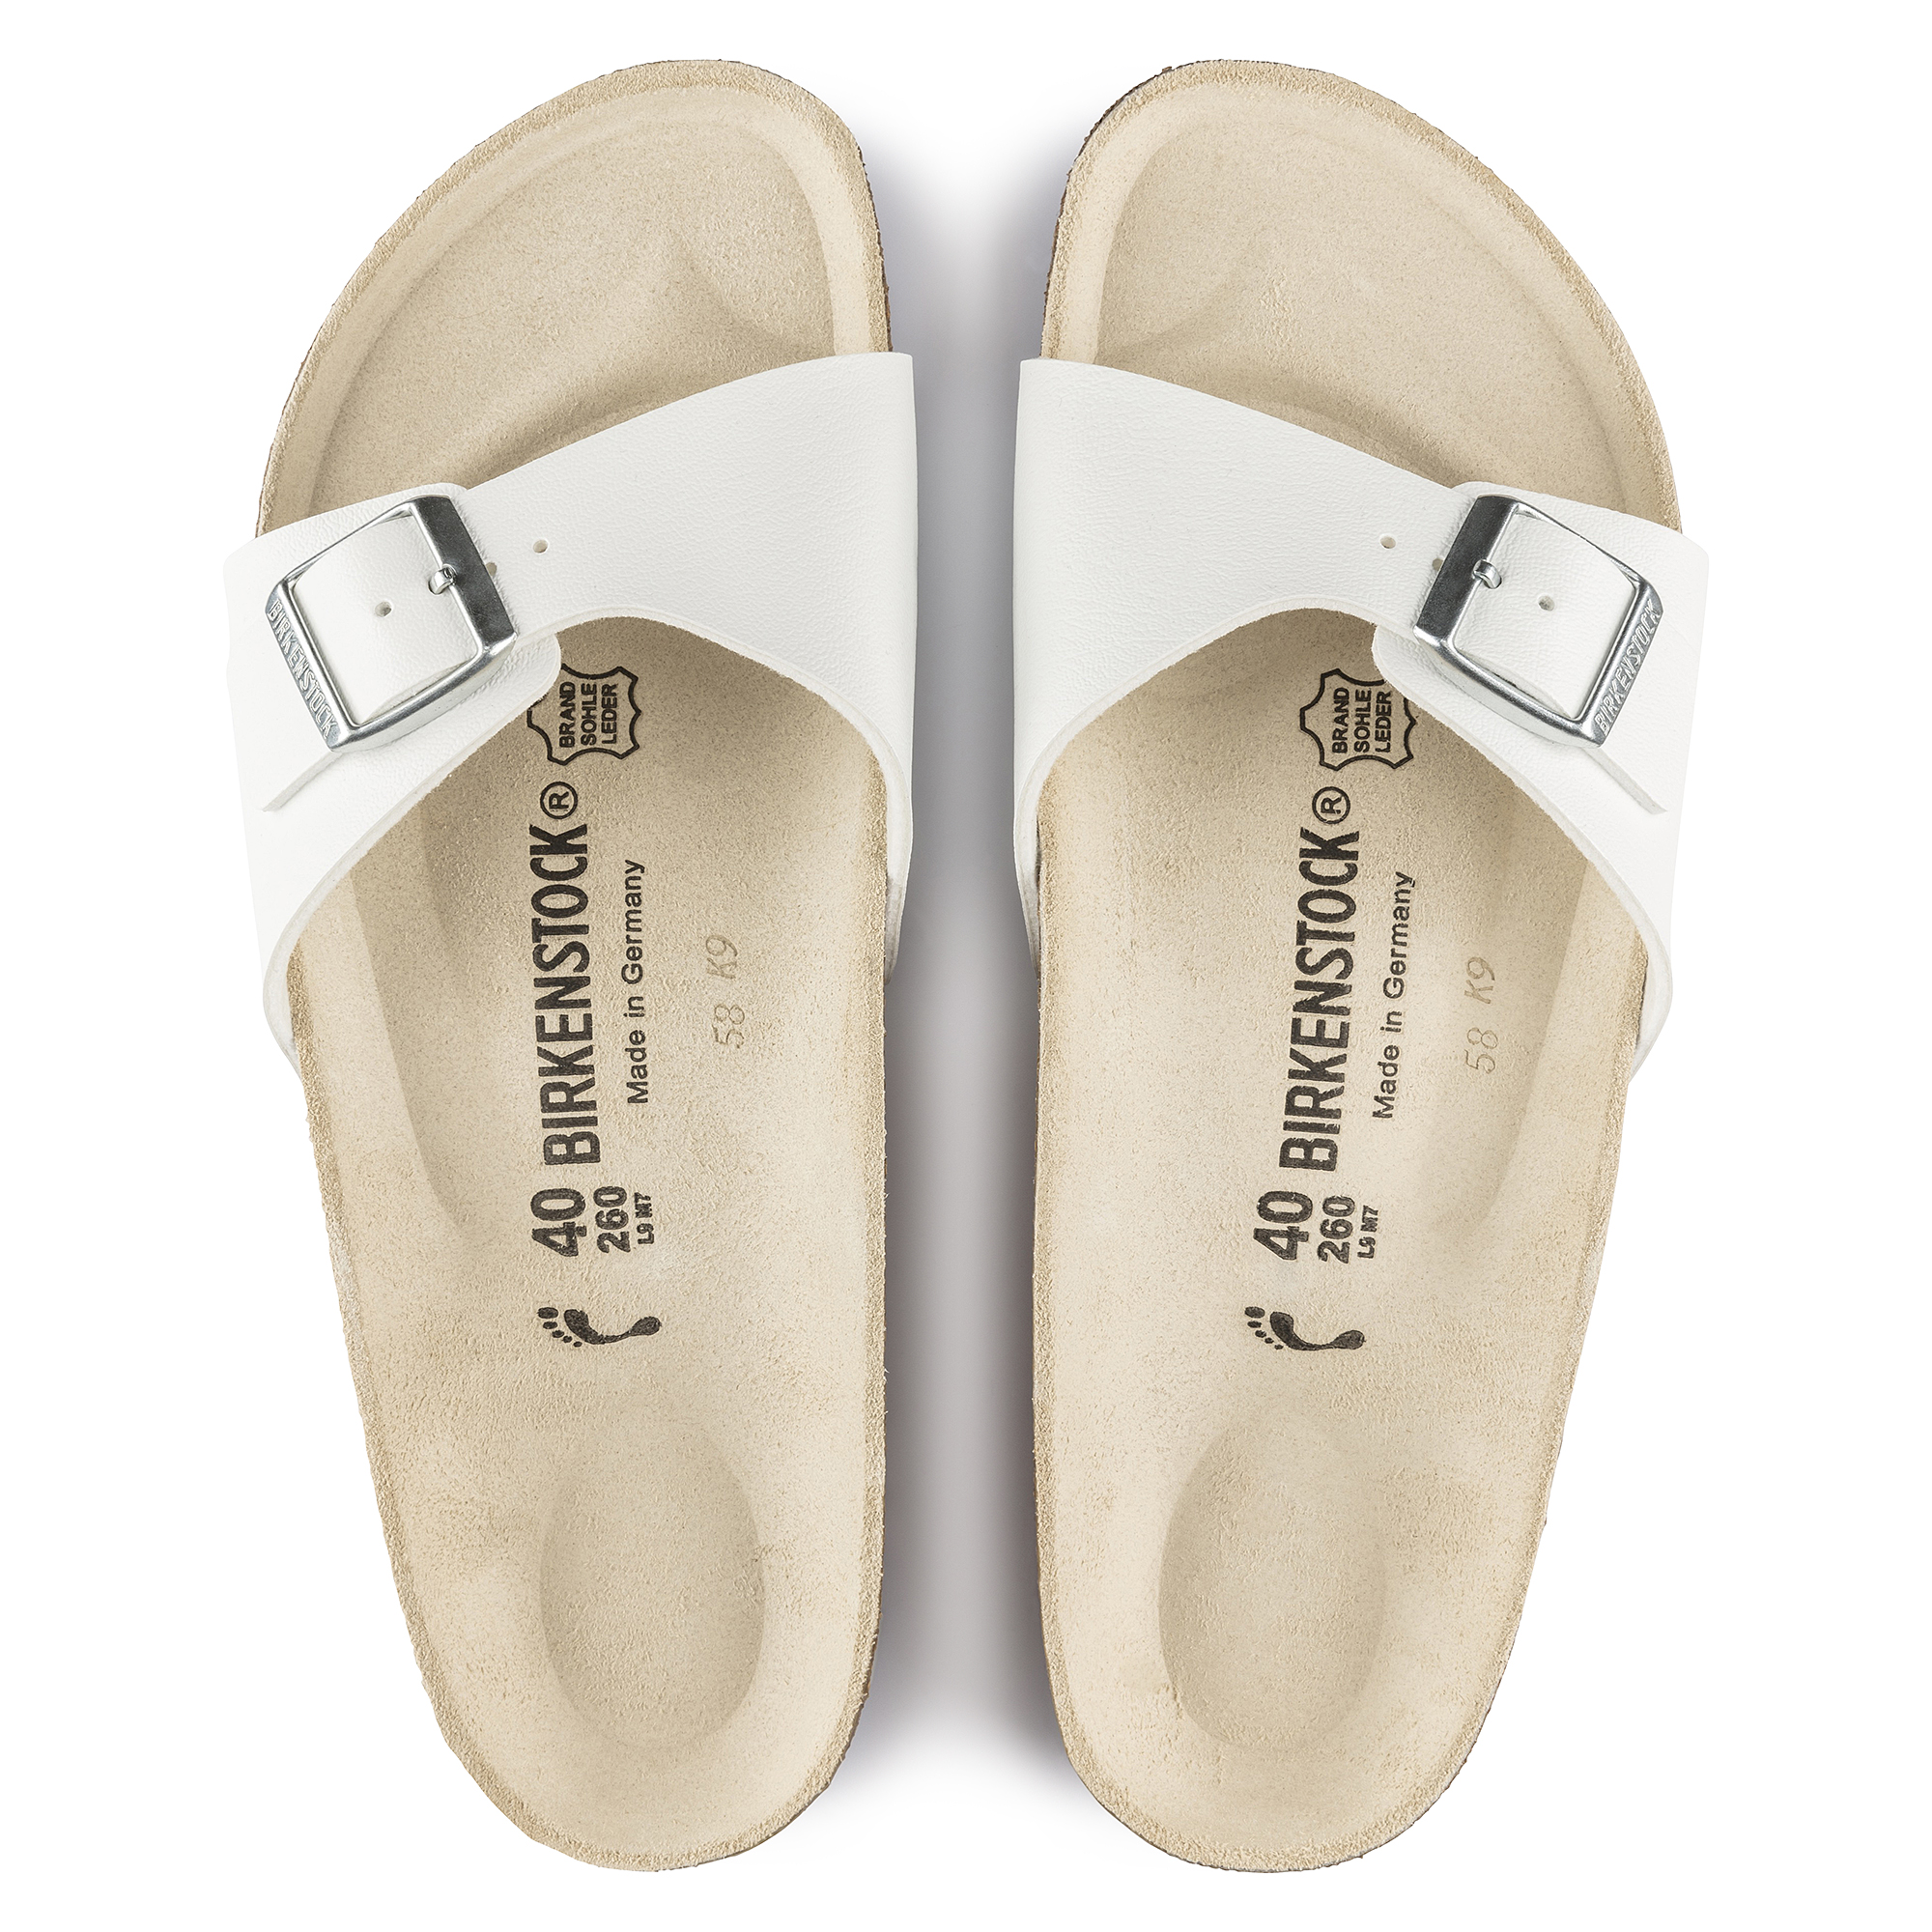 BIRKENSTOCK Made in Germany Double Strap White Plastic Slides Sandals Size  41